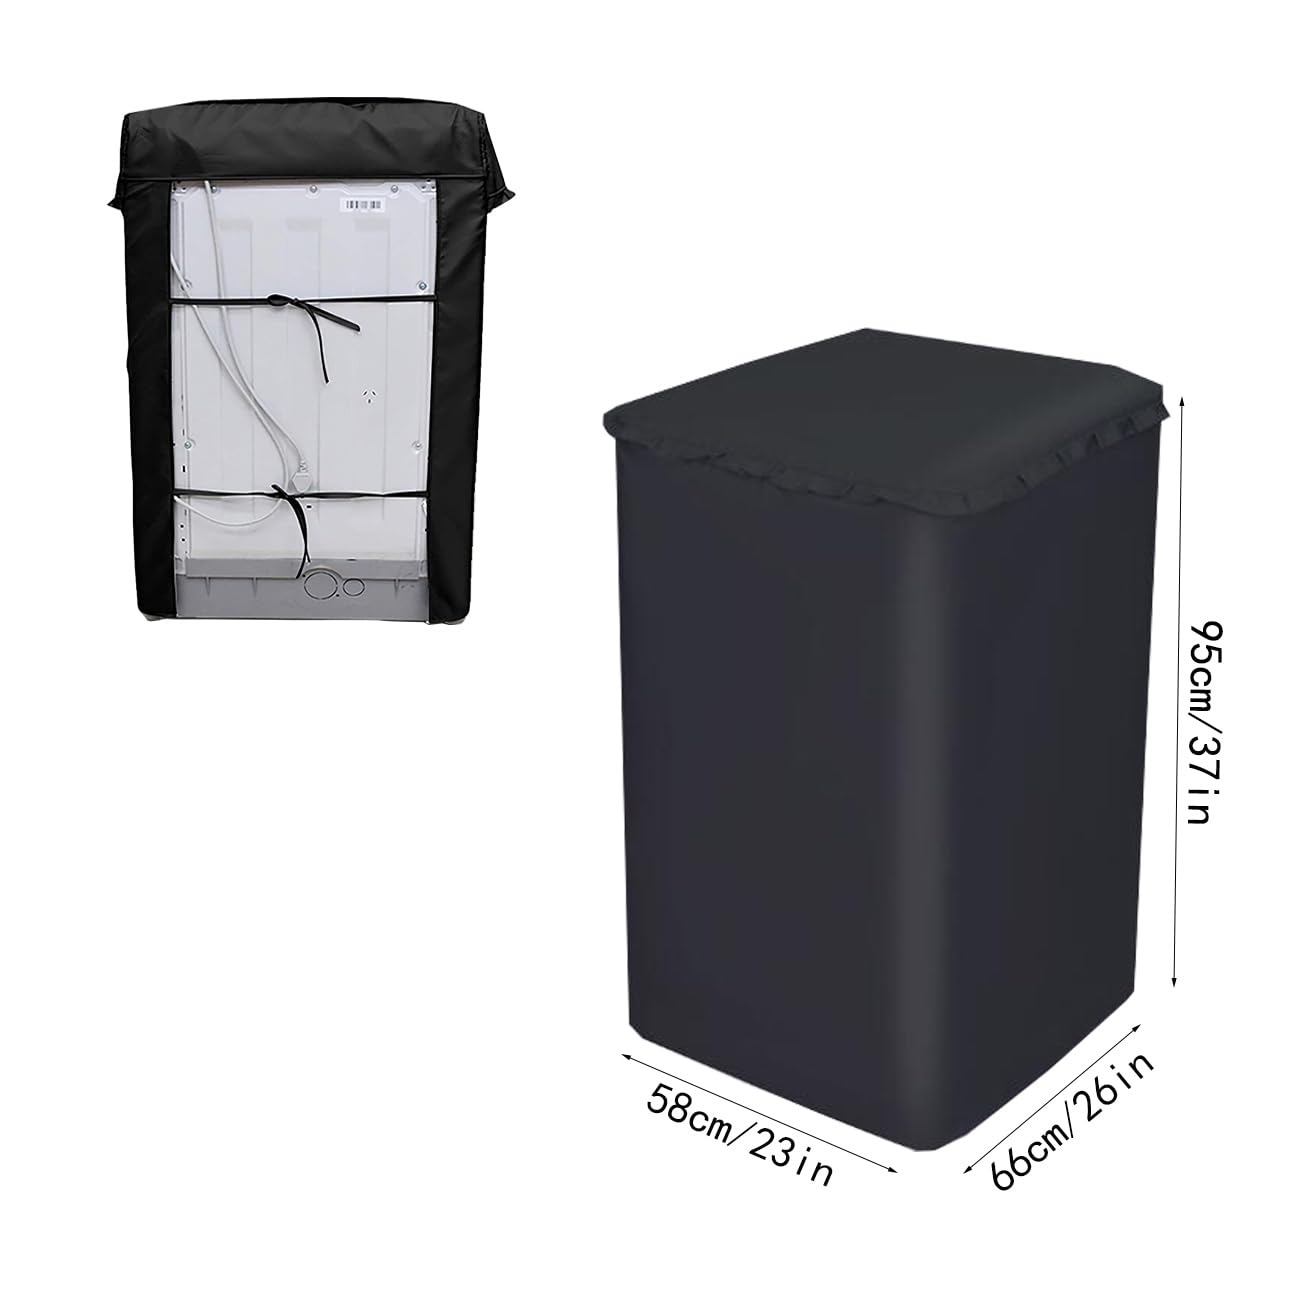 Portable Washing Machine Cover,Top Load Washer Dryer Cover, Washing Appliance Protector(Black) (XL-W23D26H37)